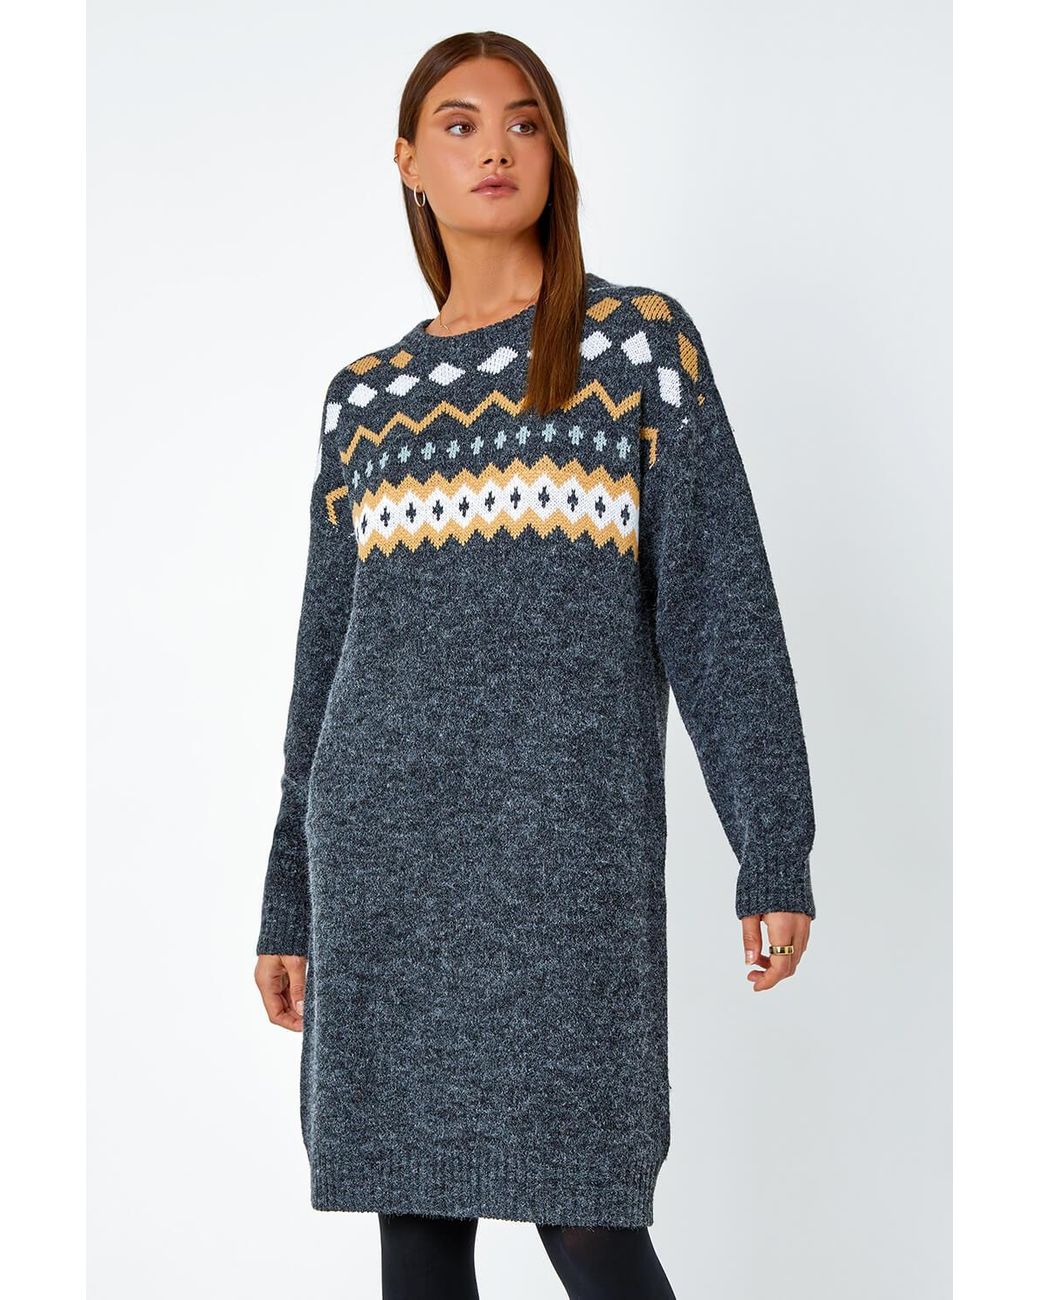 Roman Nordic Print Knitted Jumper Dress in Brown | Lyst UK